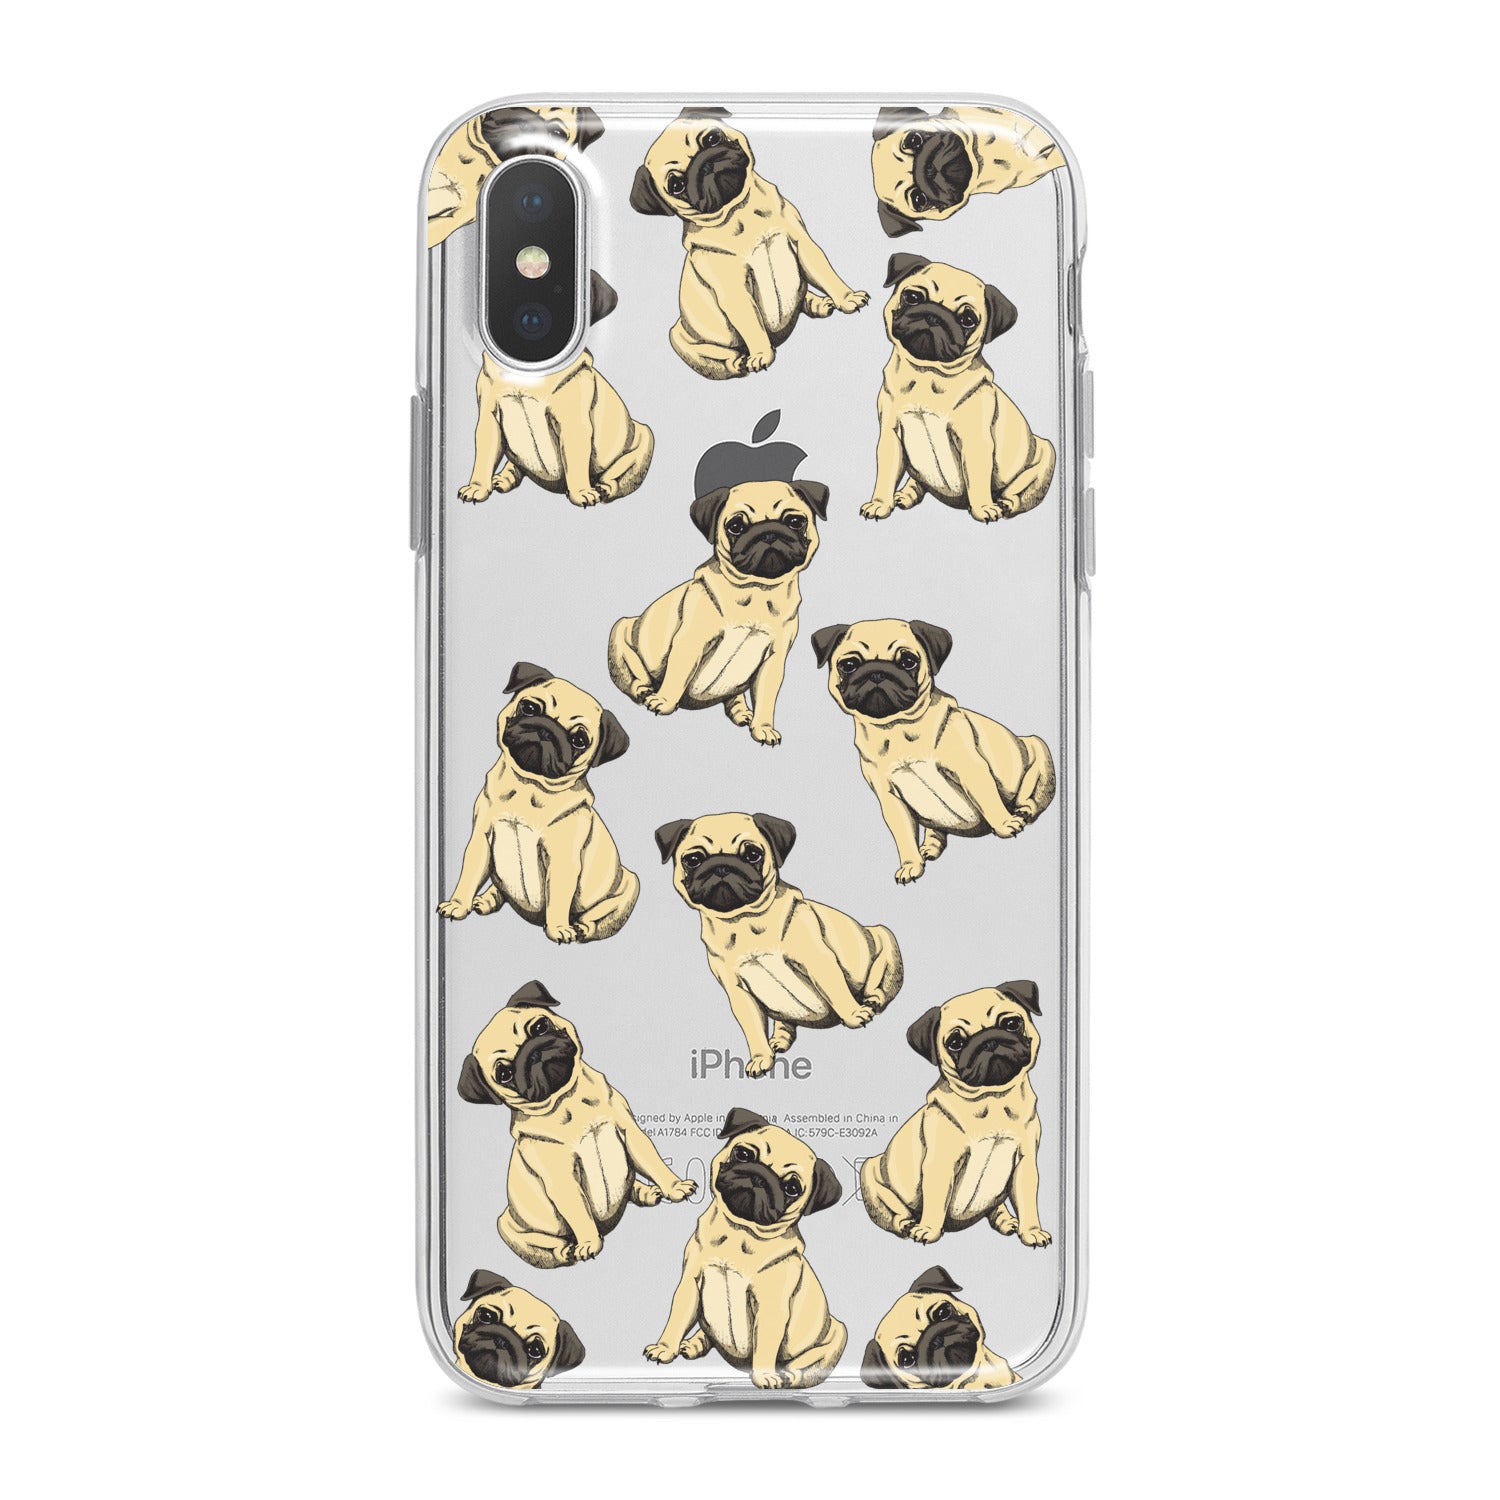 Lex Altern Puppy Pug Phone Case for your iPhone & Android phone.